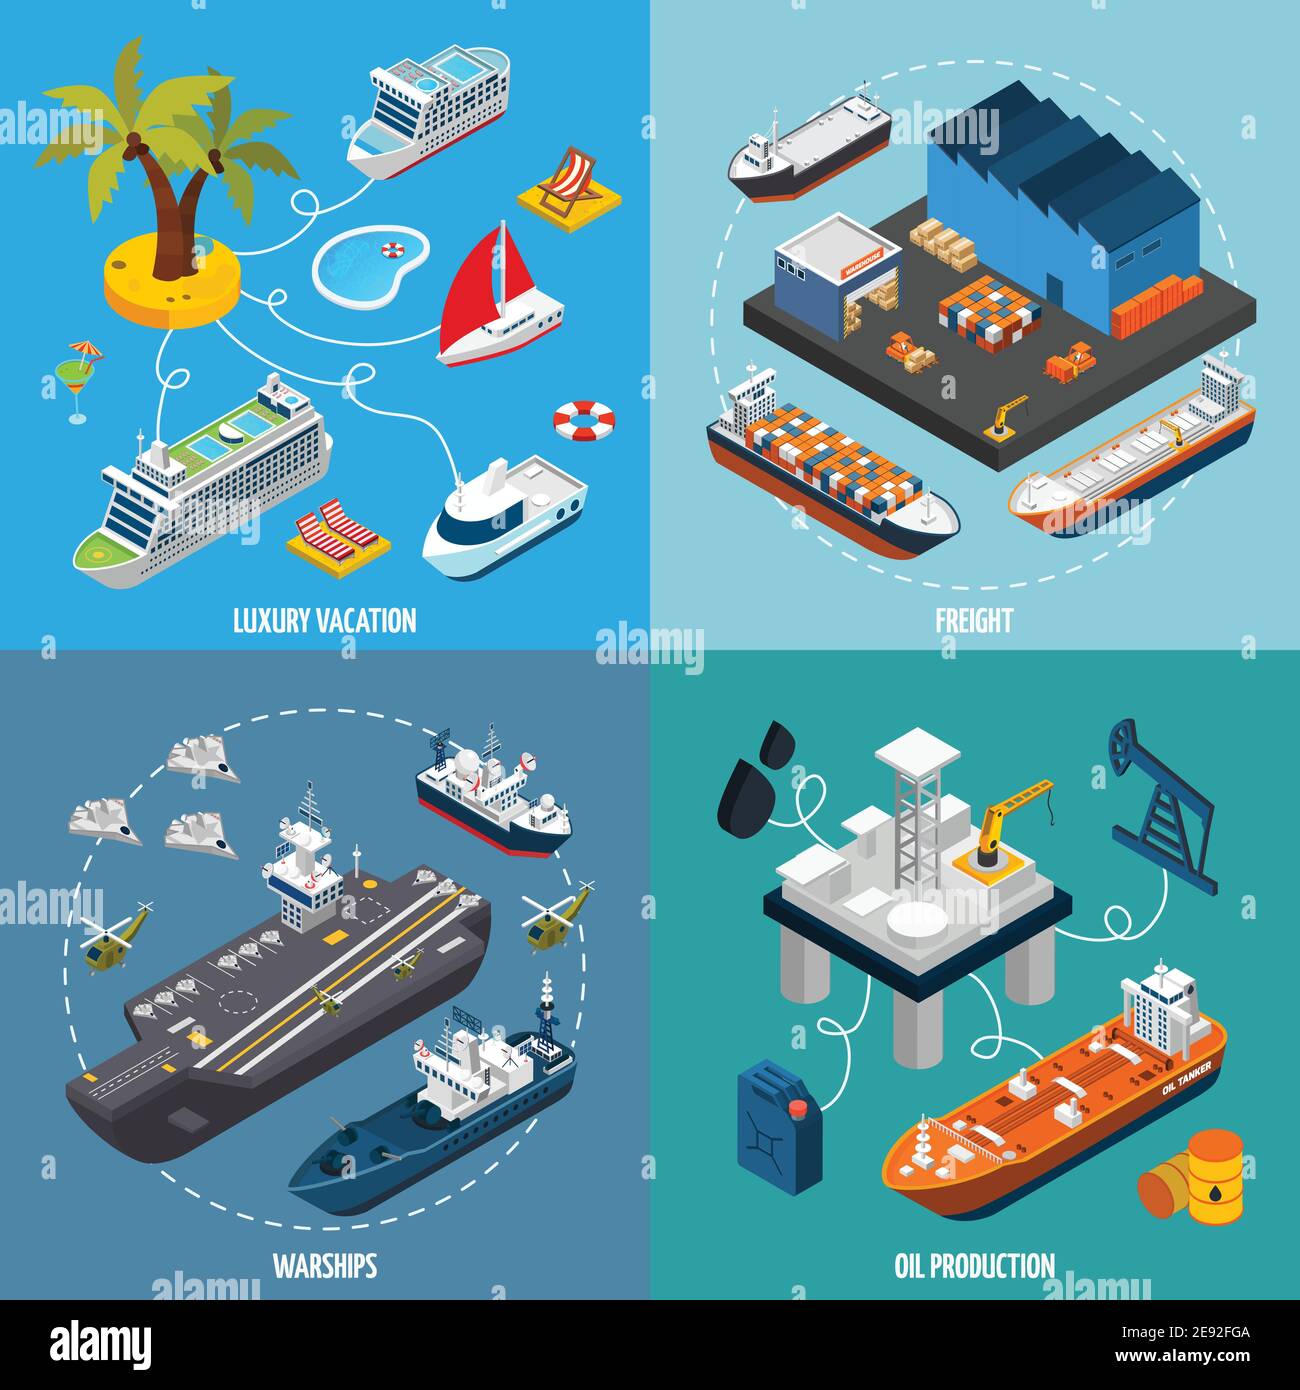 Oil tanker and luxury vacation passenger liner vessels 4 isometric icons square composition poster abstract isolated vector illustration Stock Vector